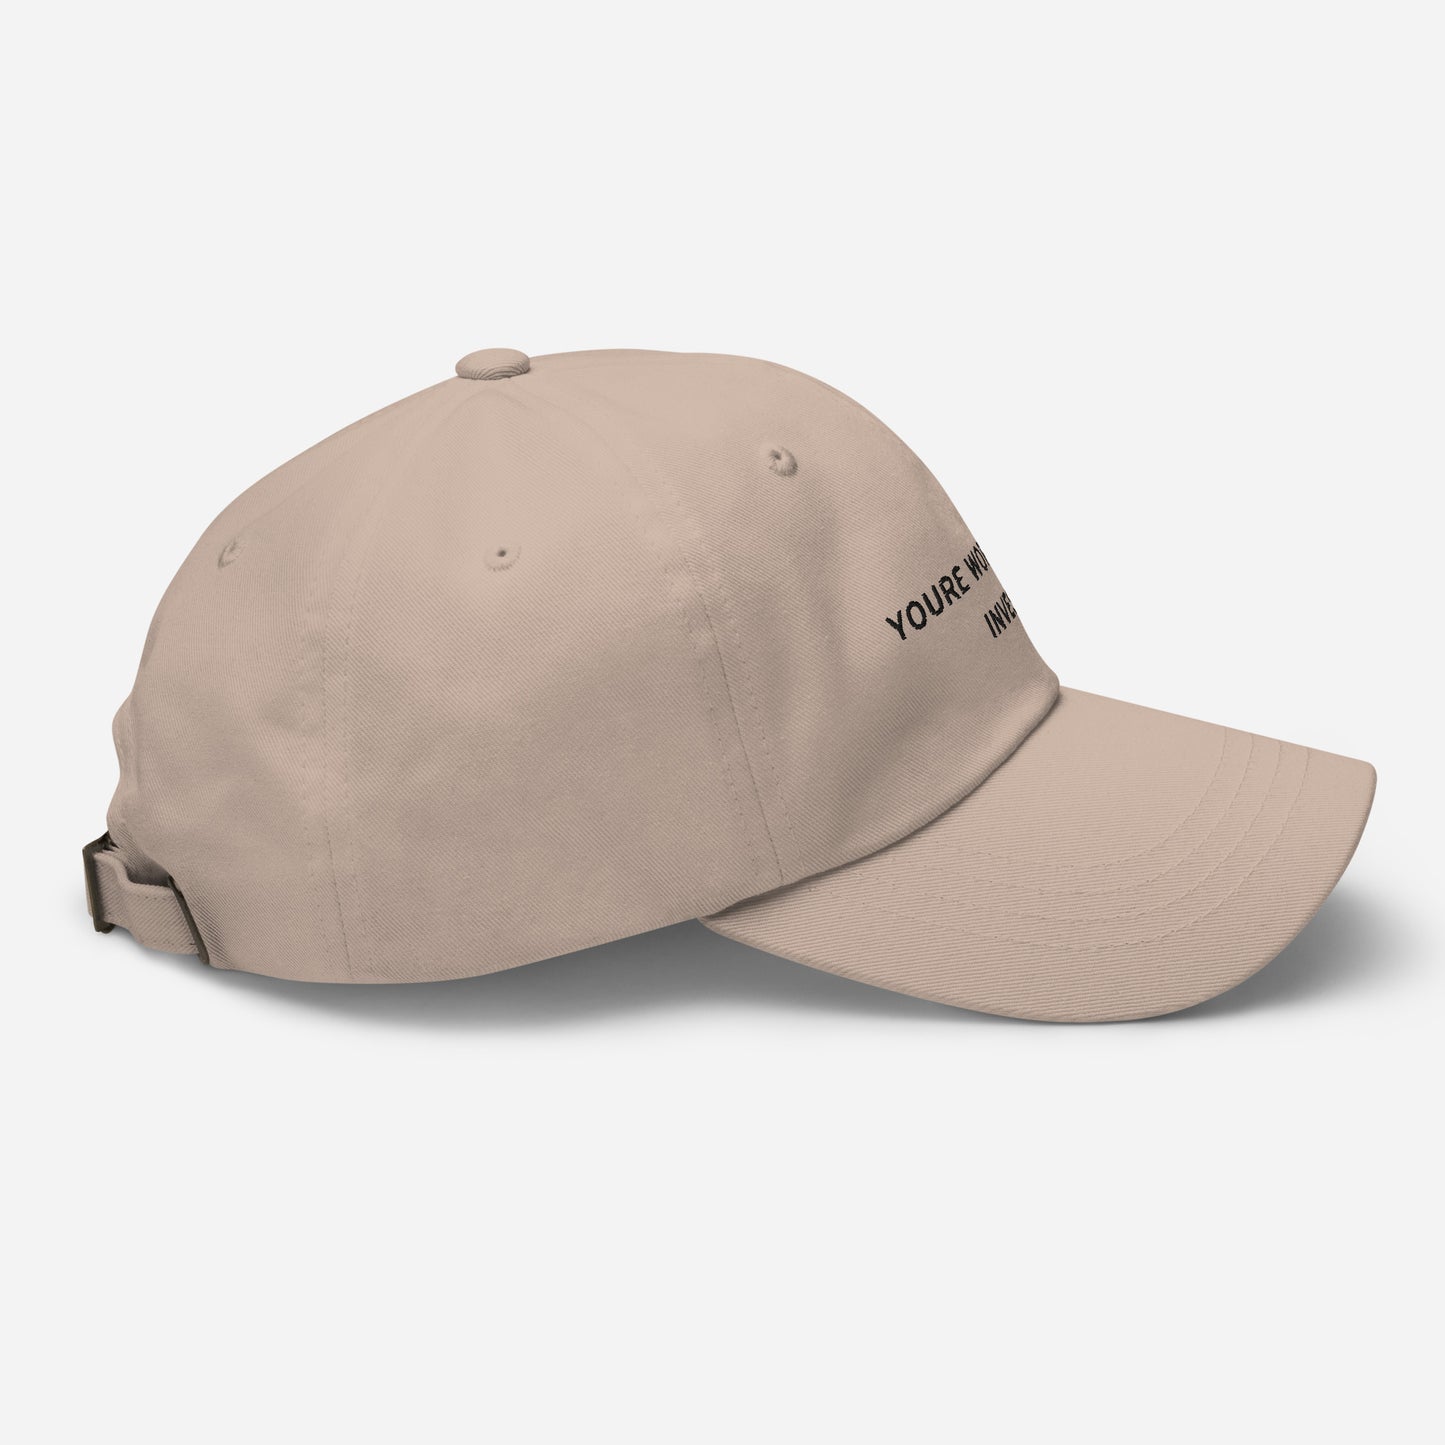 Invested Dad hat